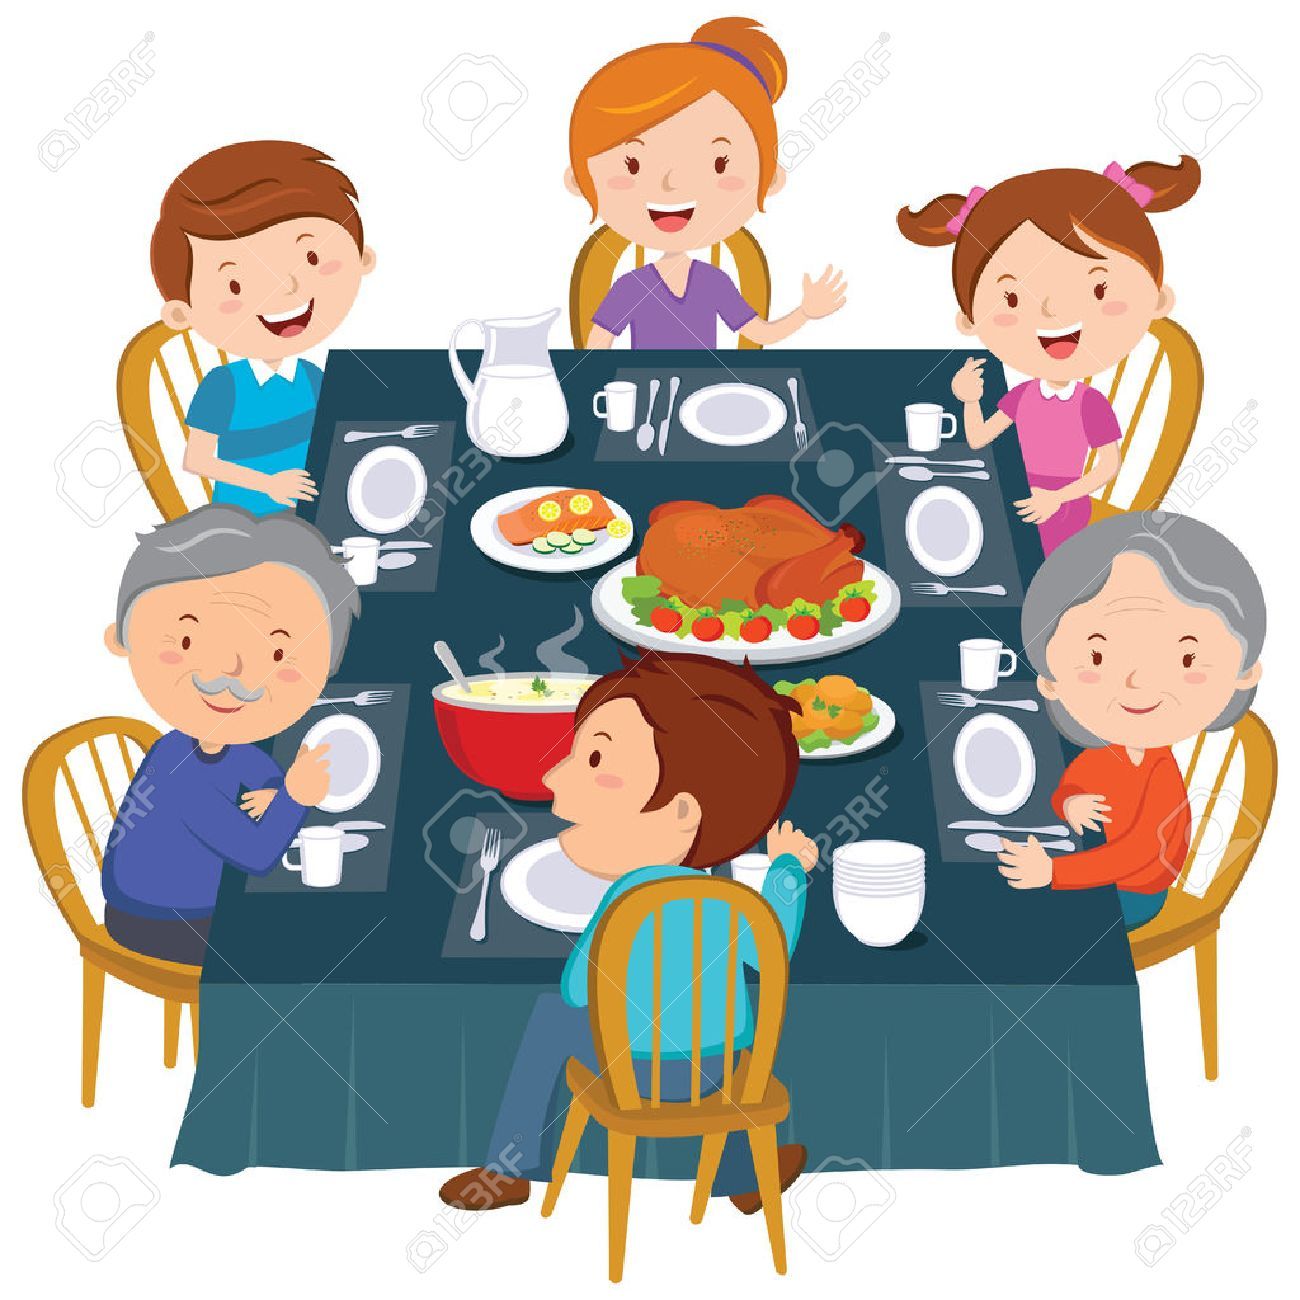 Diner clipart family, Diner family Transparent FREE for download on ...